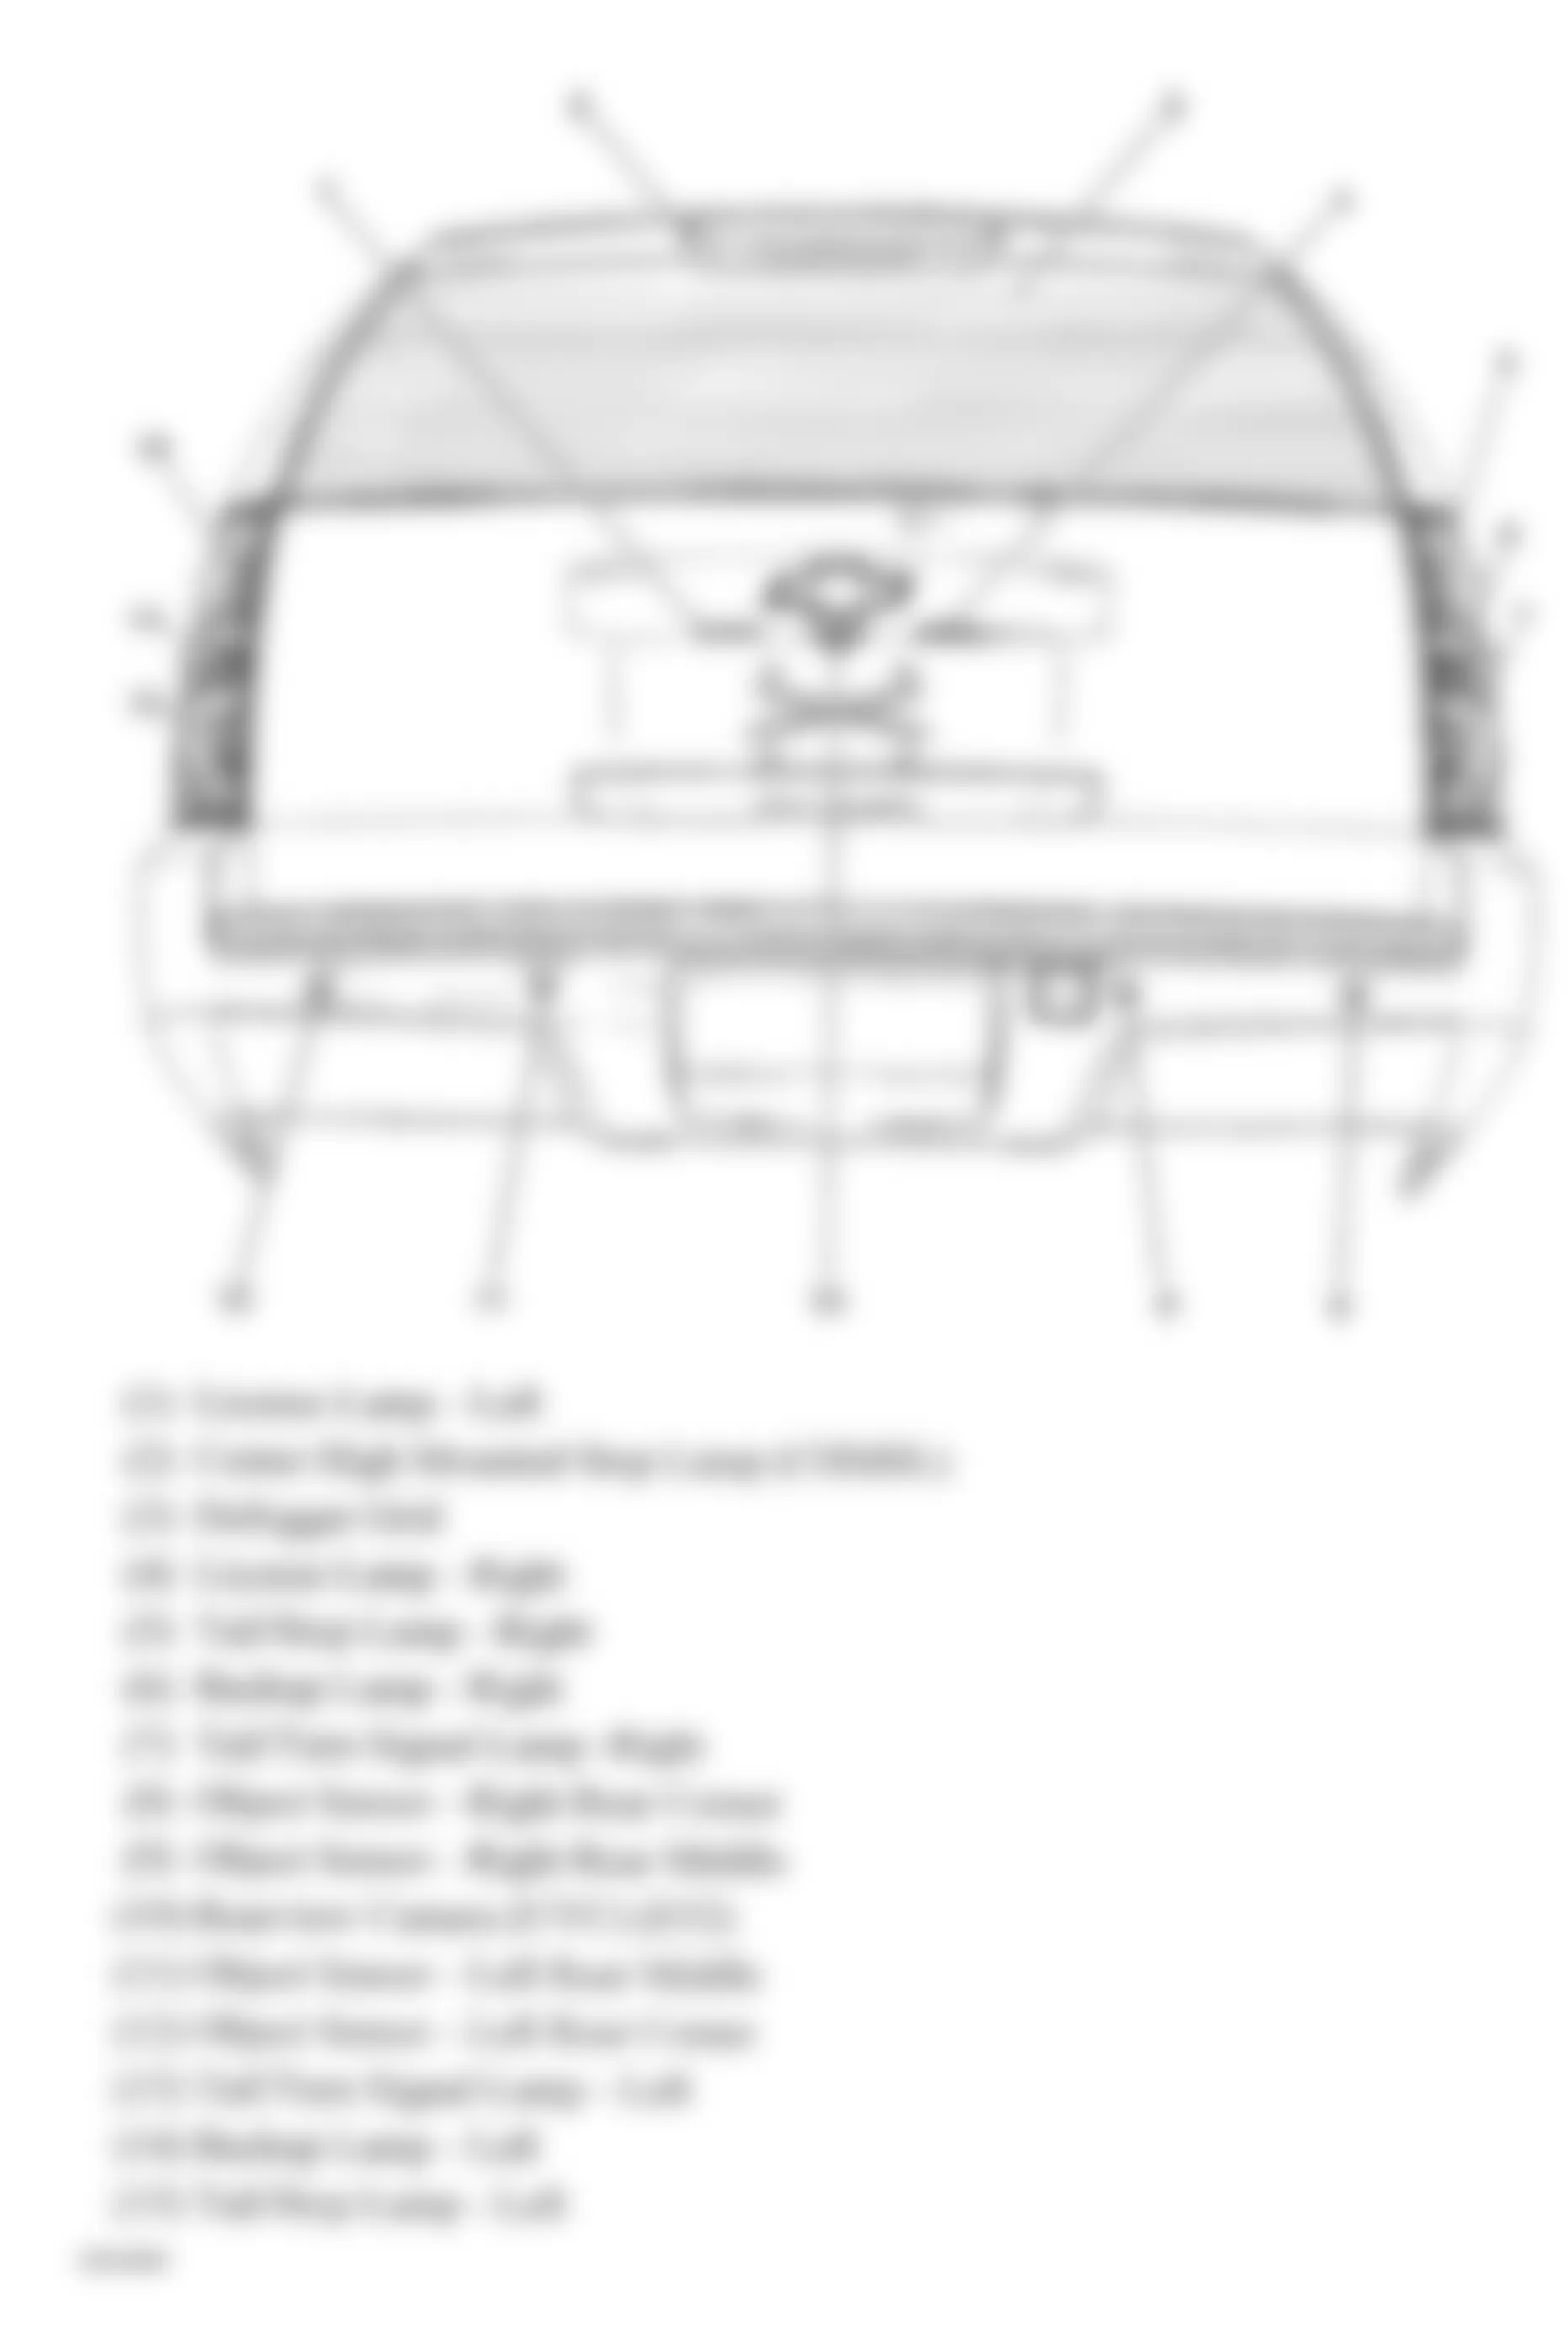 GMC Yukon XL C1500 2008 - Component Locations -  Rear Of Vehicle (Avalanche, Suburban & Tahoe W/One Piece Liftgate)